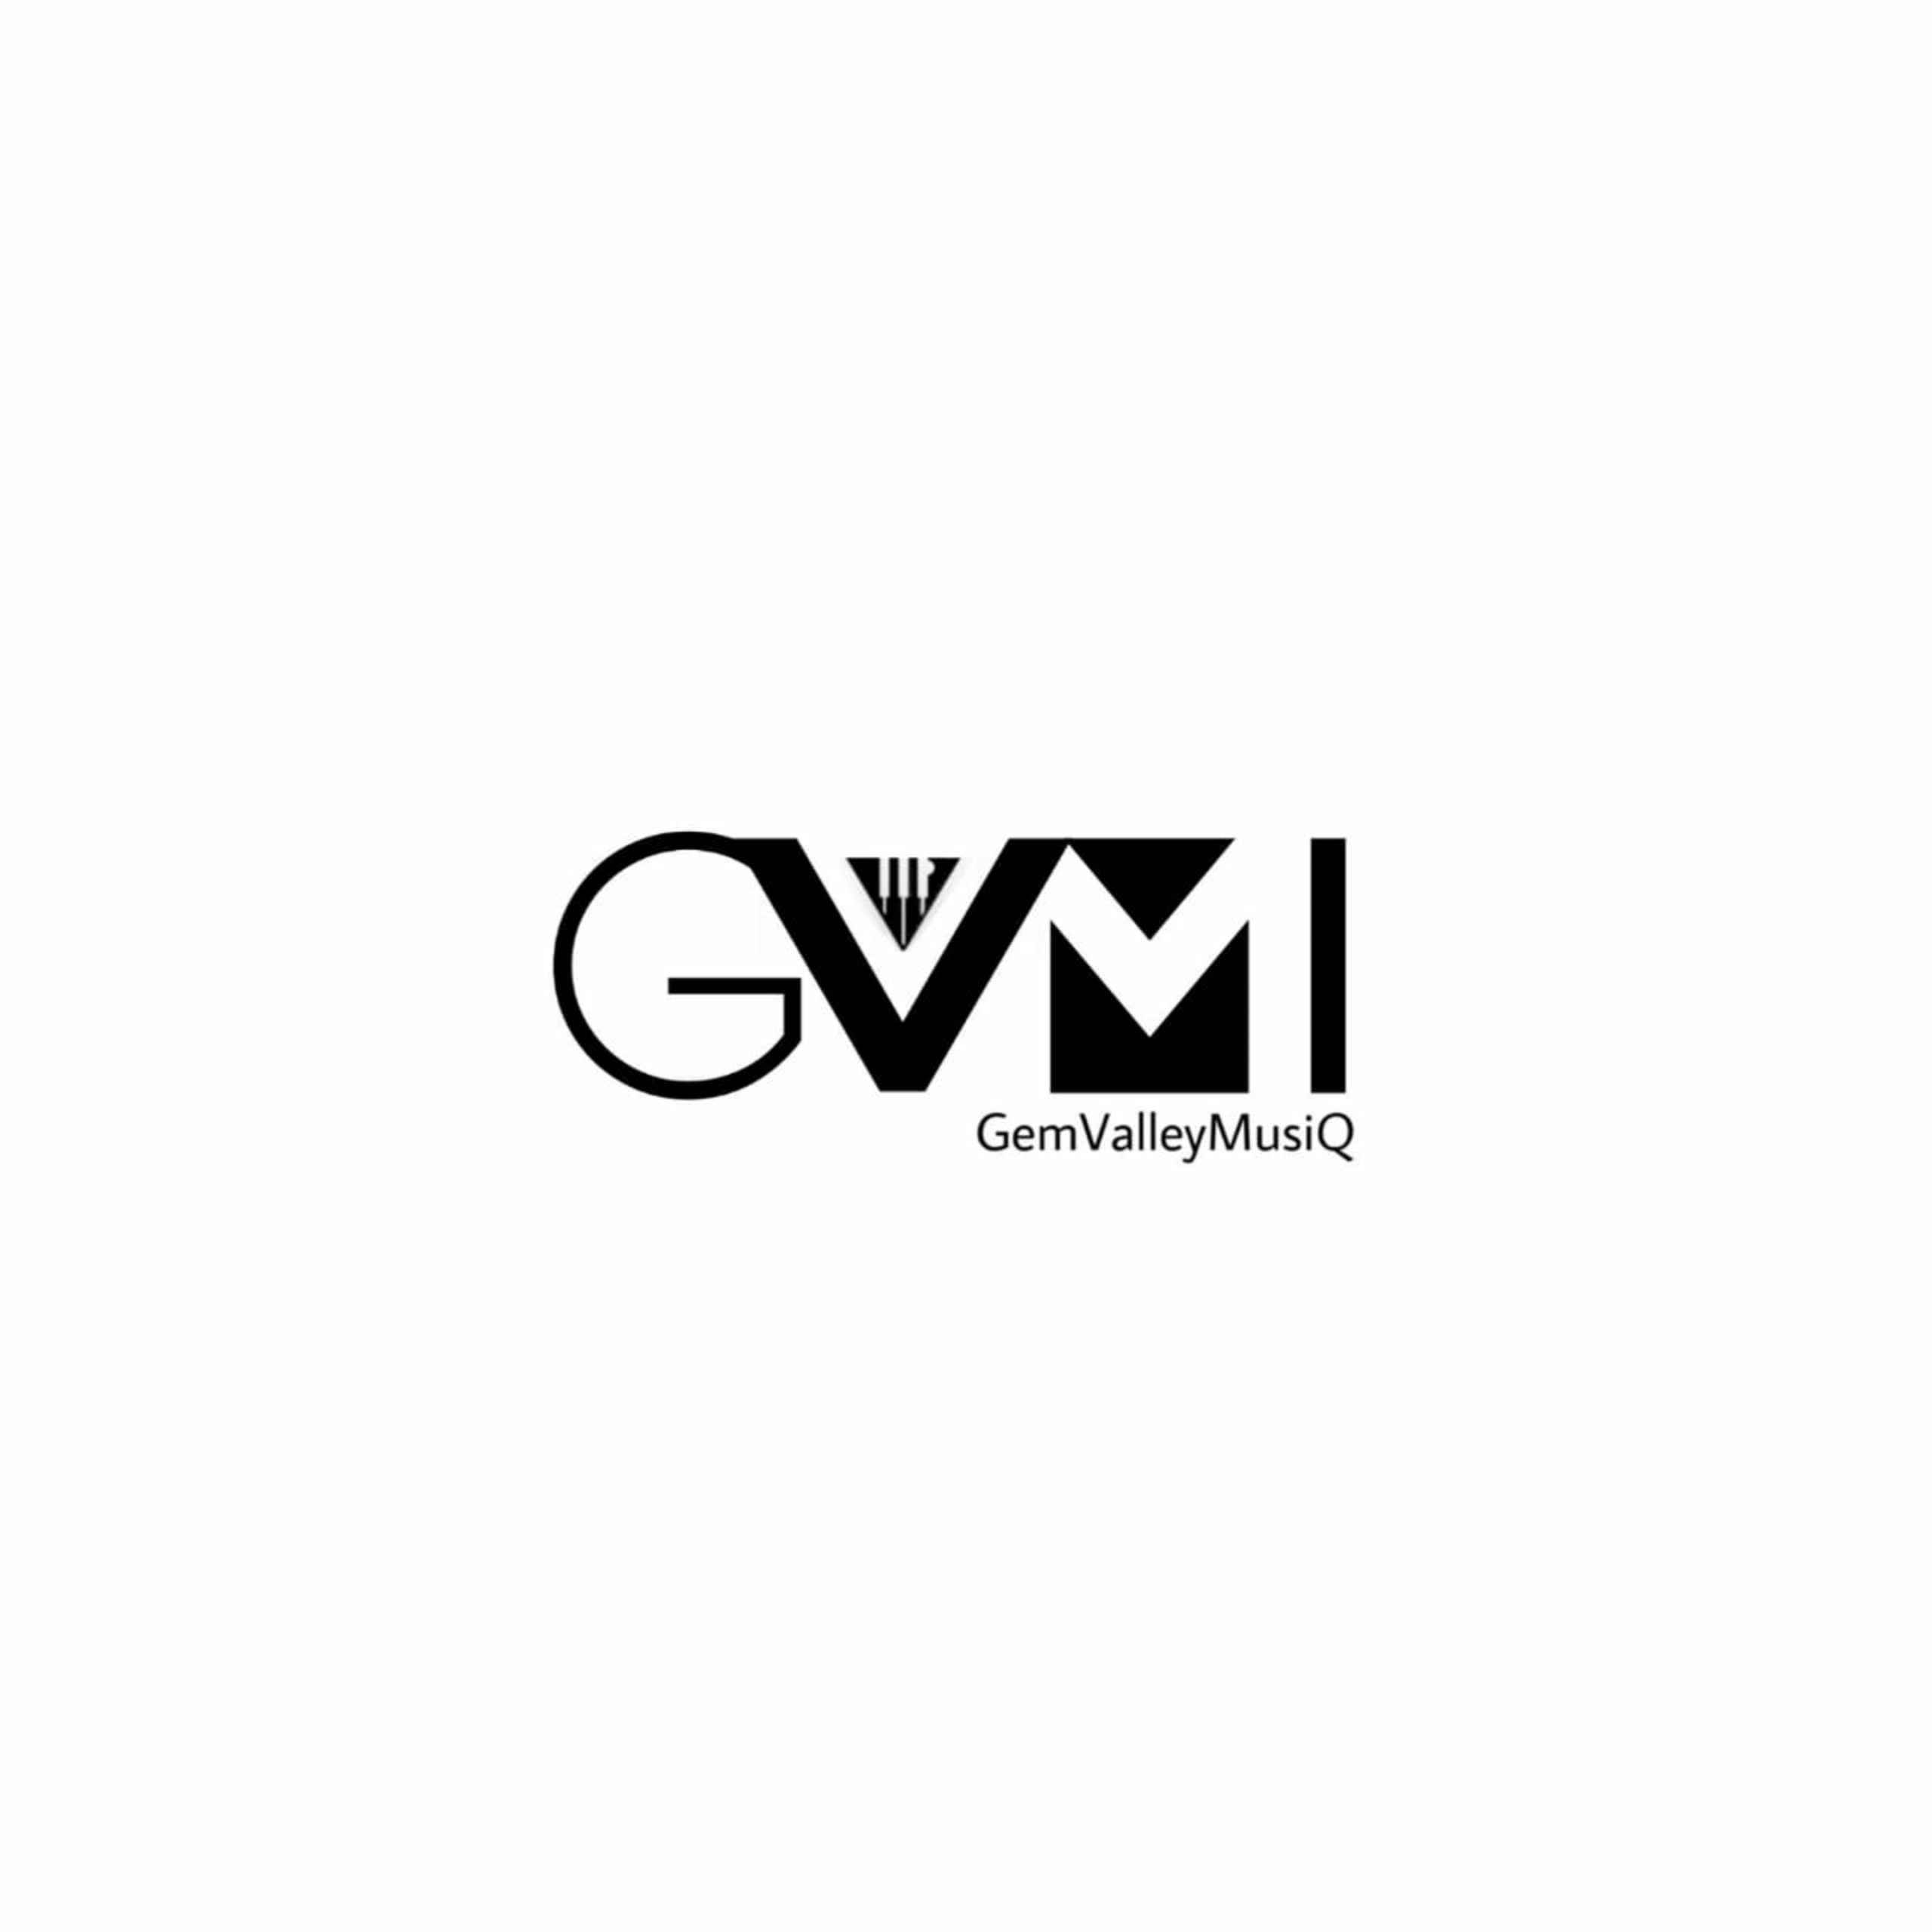 Gem Valley MusiQ - Clap & Dance ft Toxicated Keys Mp3 Download